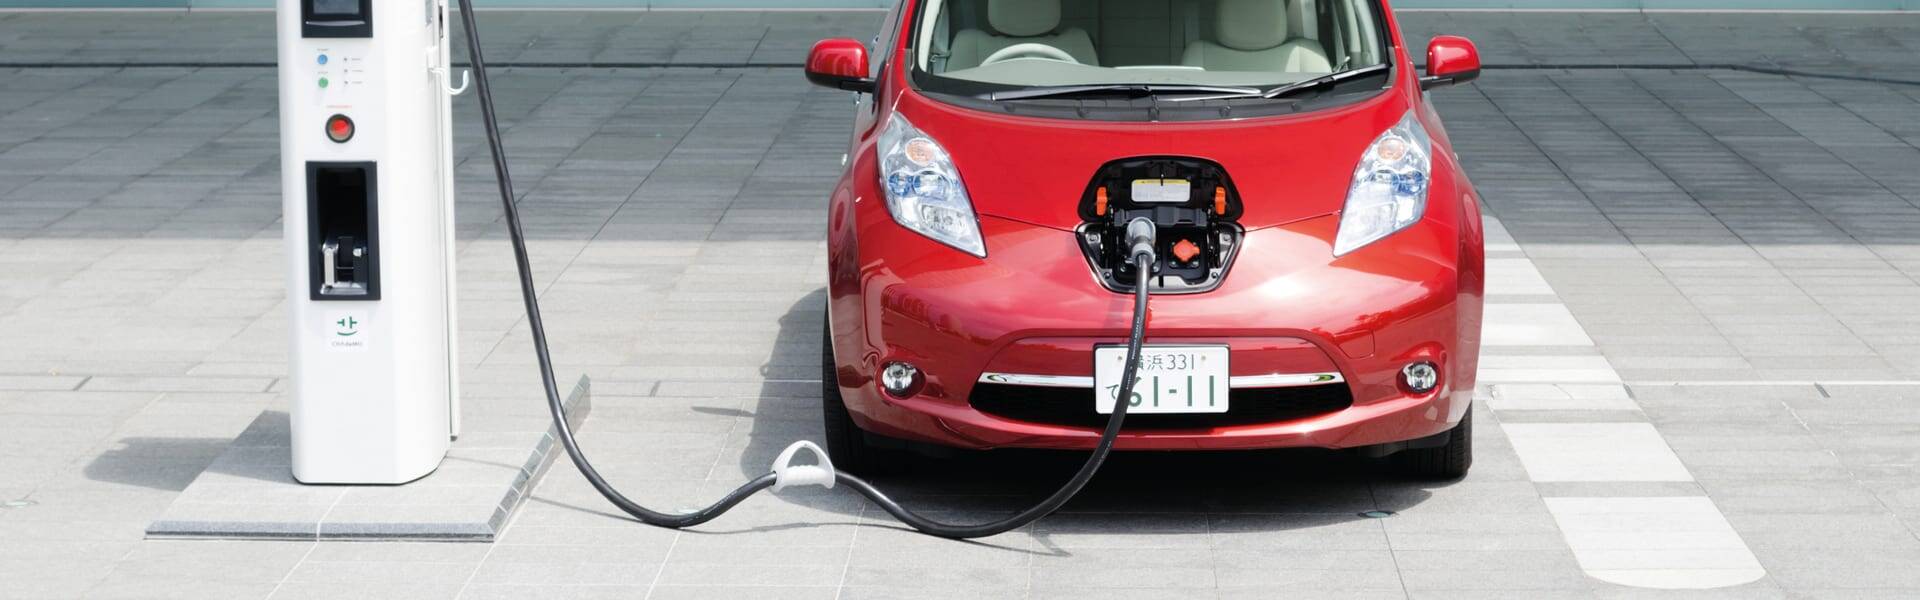 EDF buys battery and EV charging startup Pivot Power